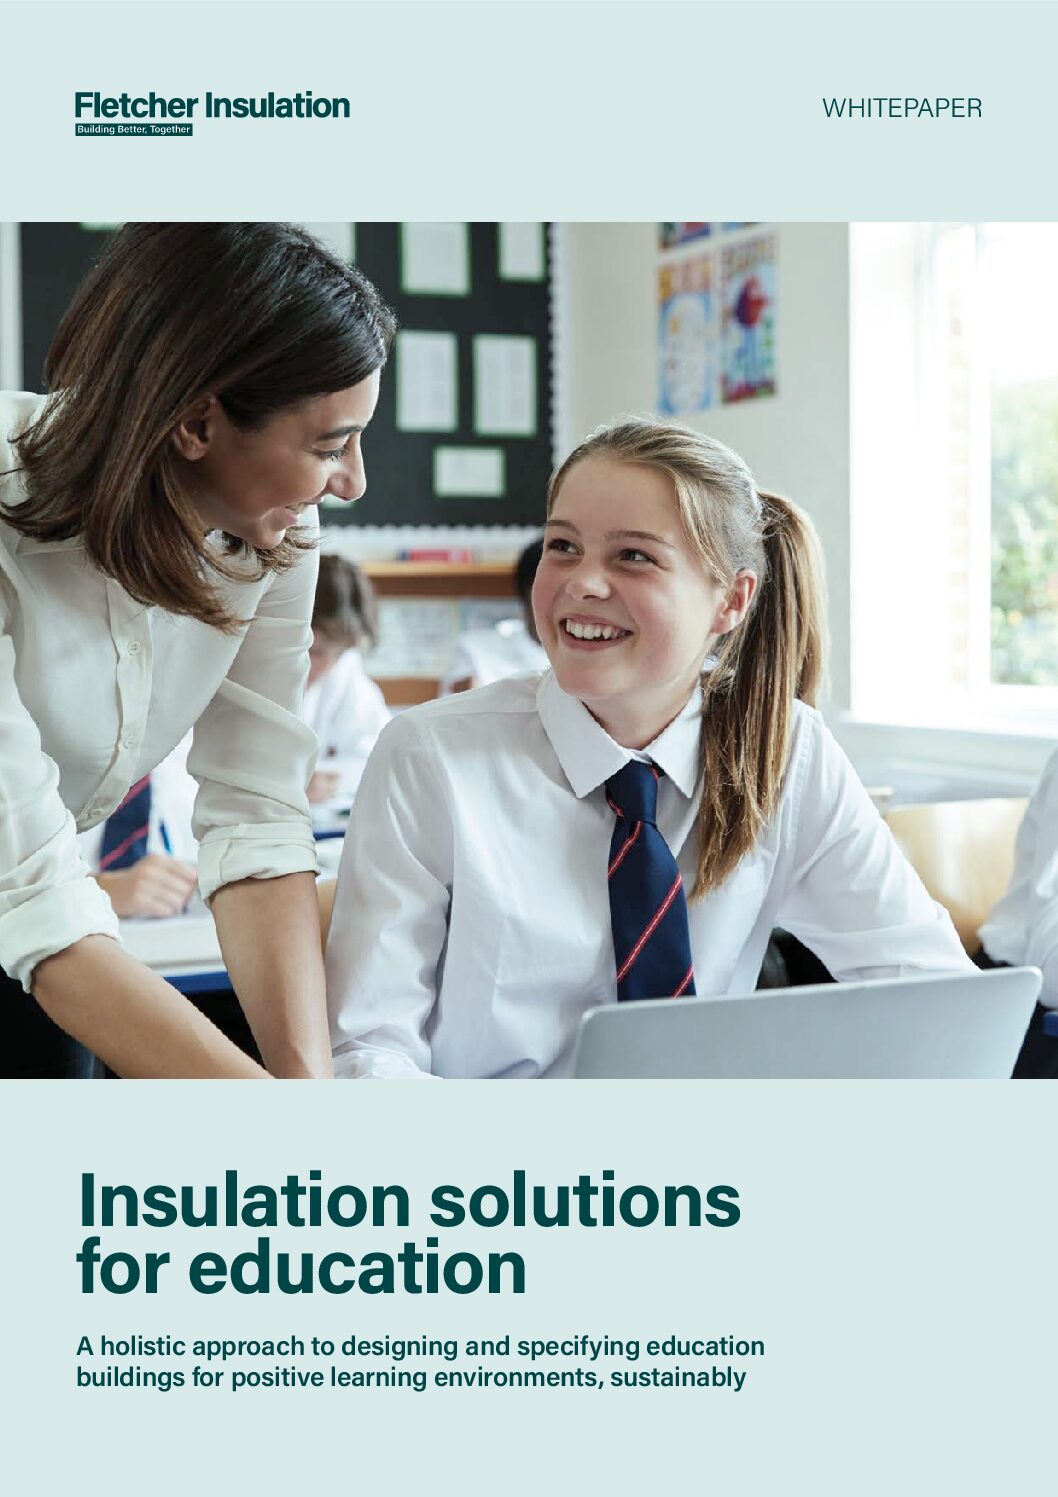 Whitepaper – Insulation Solutions for Education